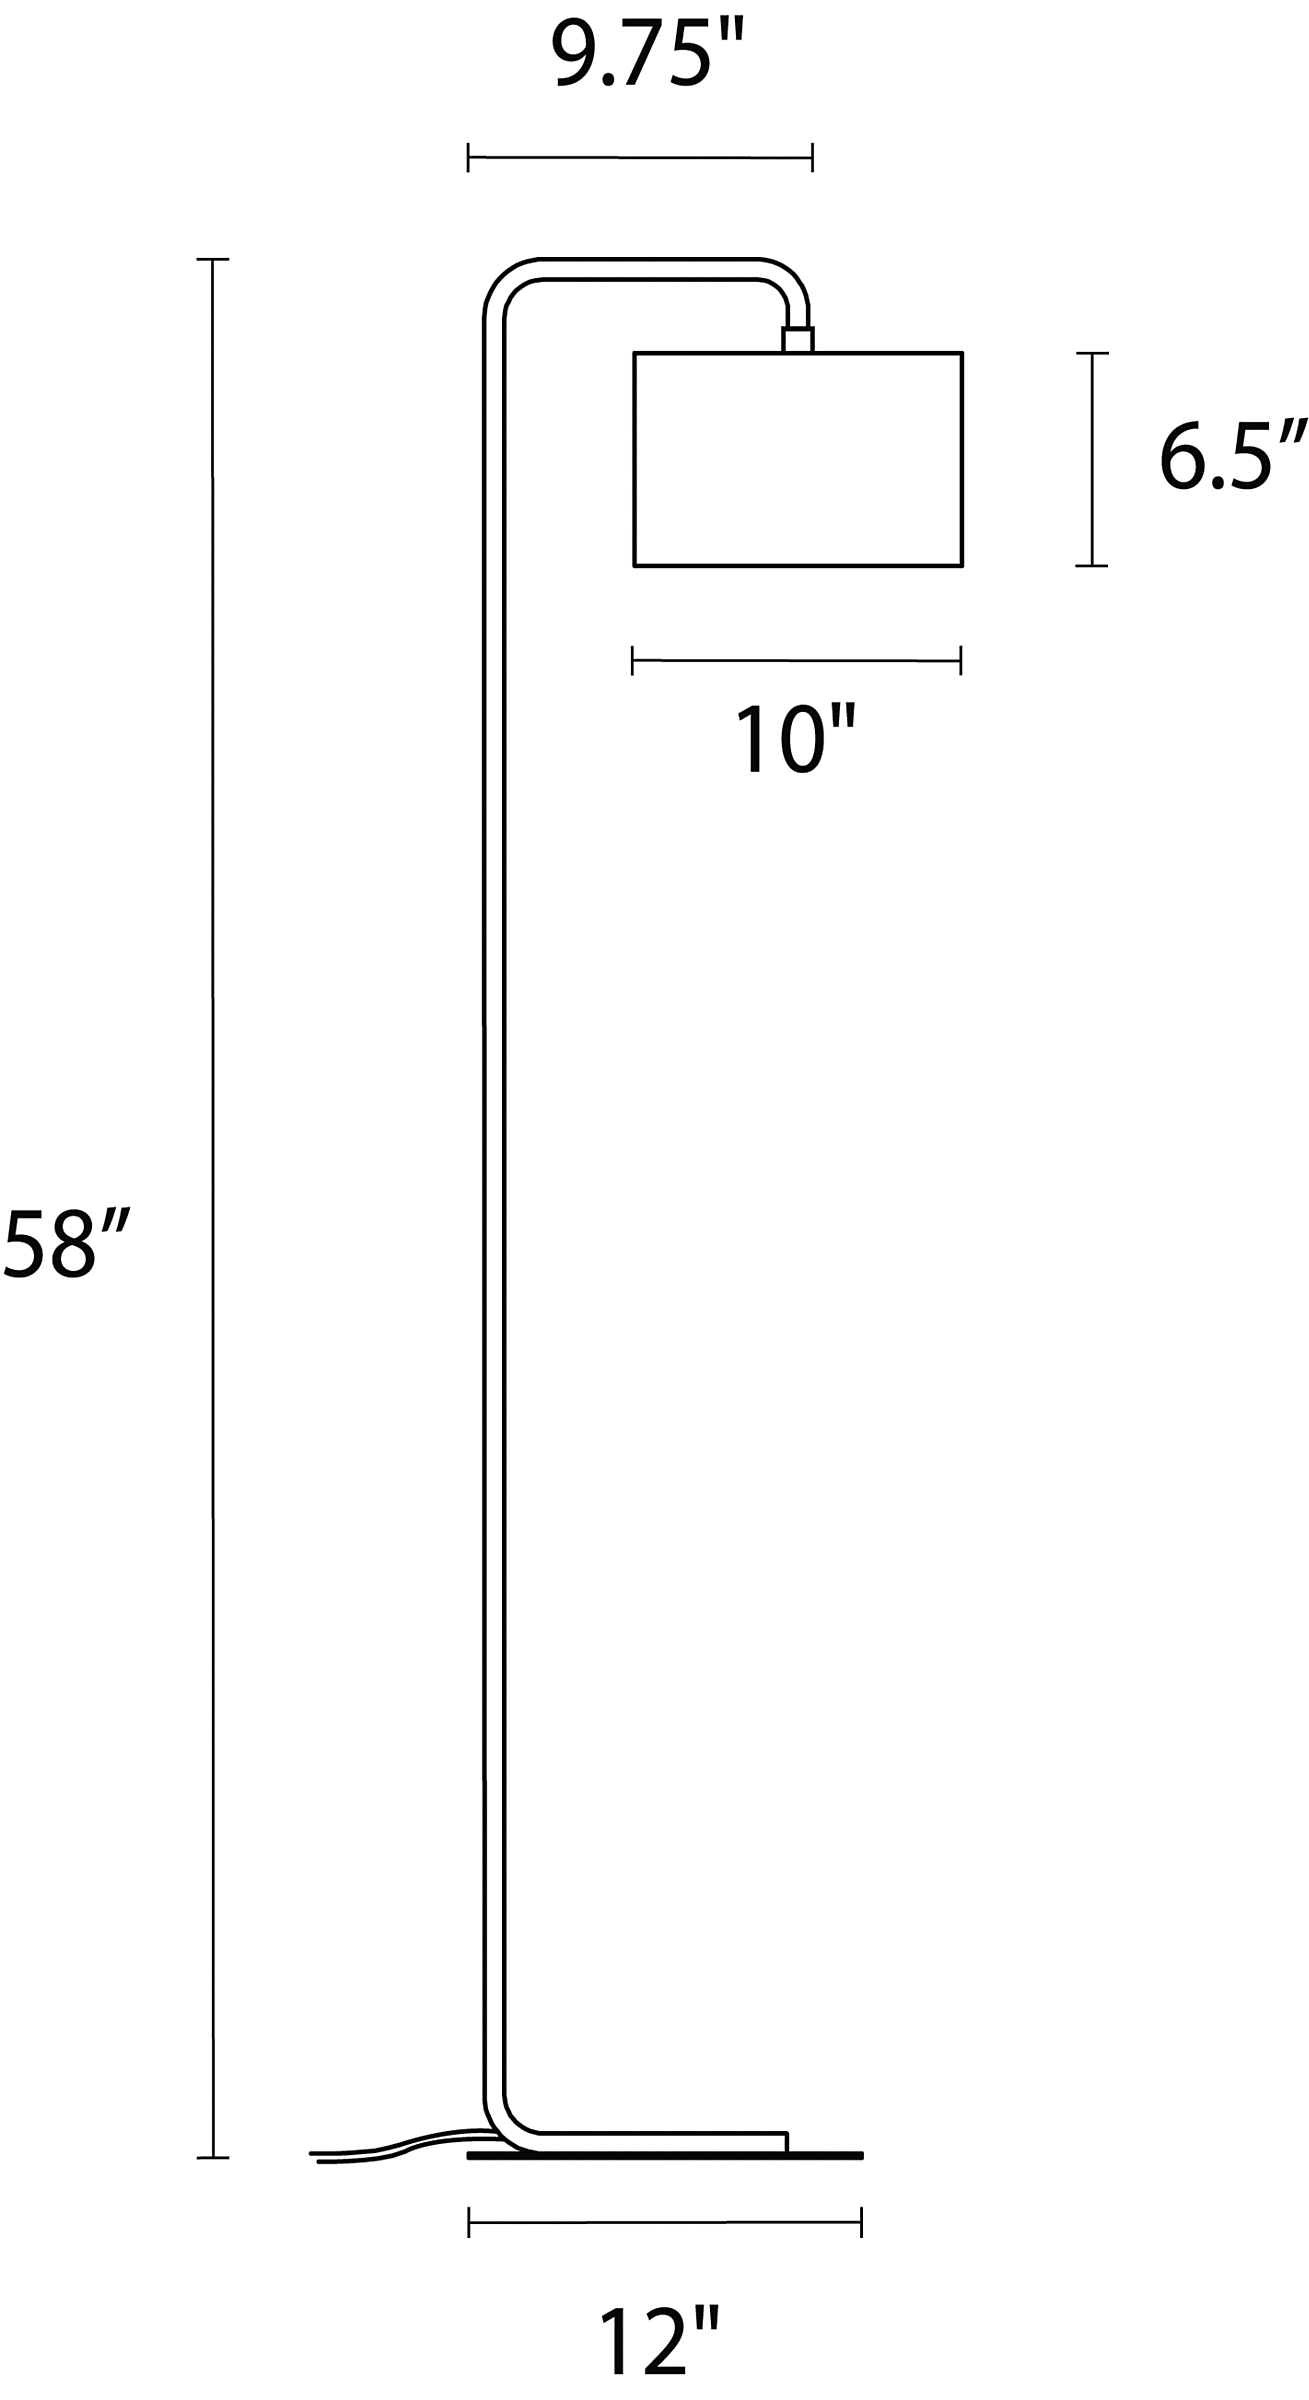 Illustration of Rayne 58h Floor Lamp with dimensions.